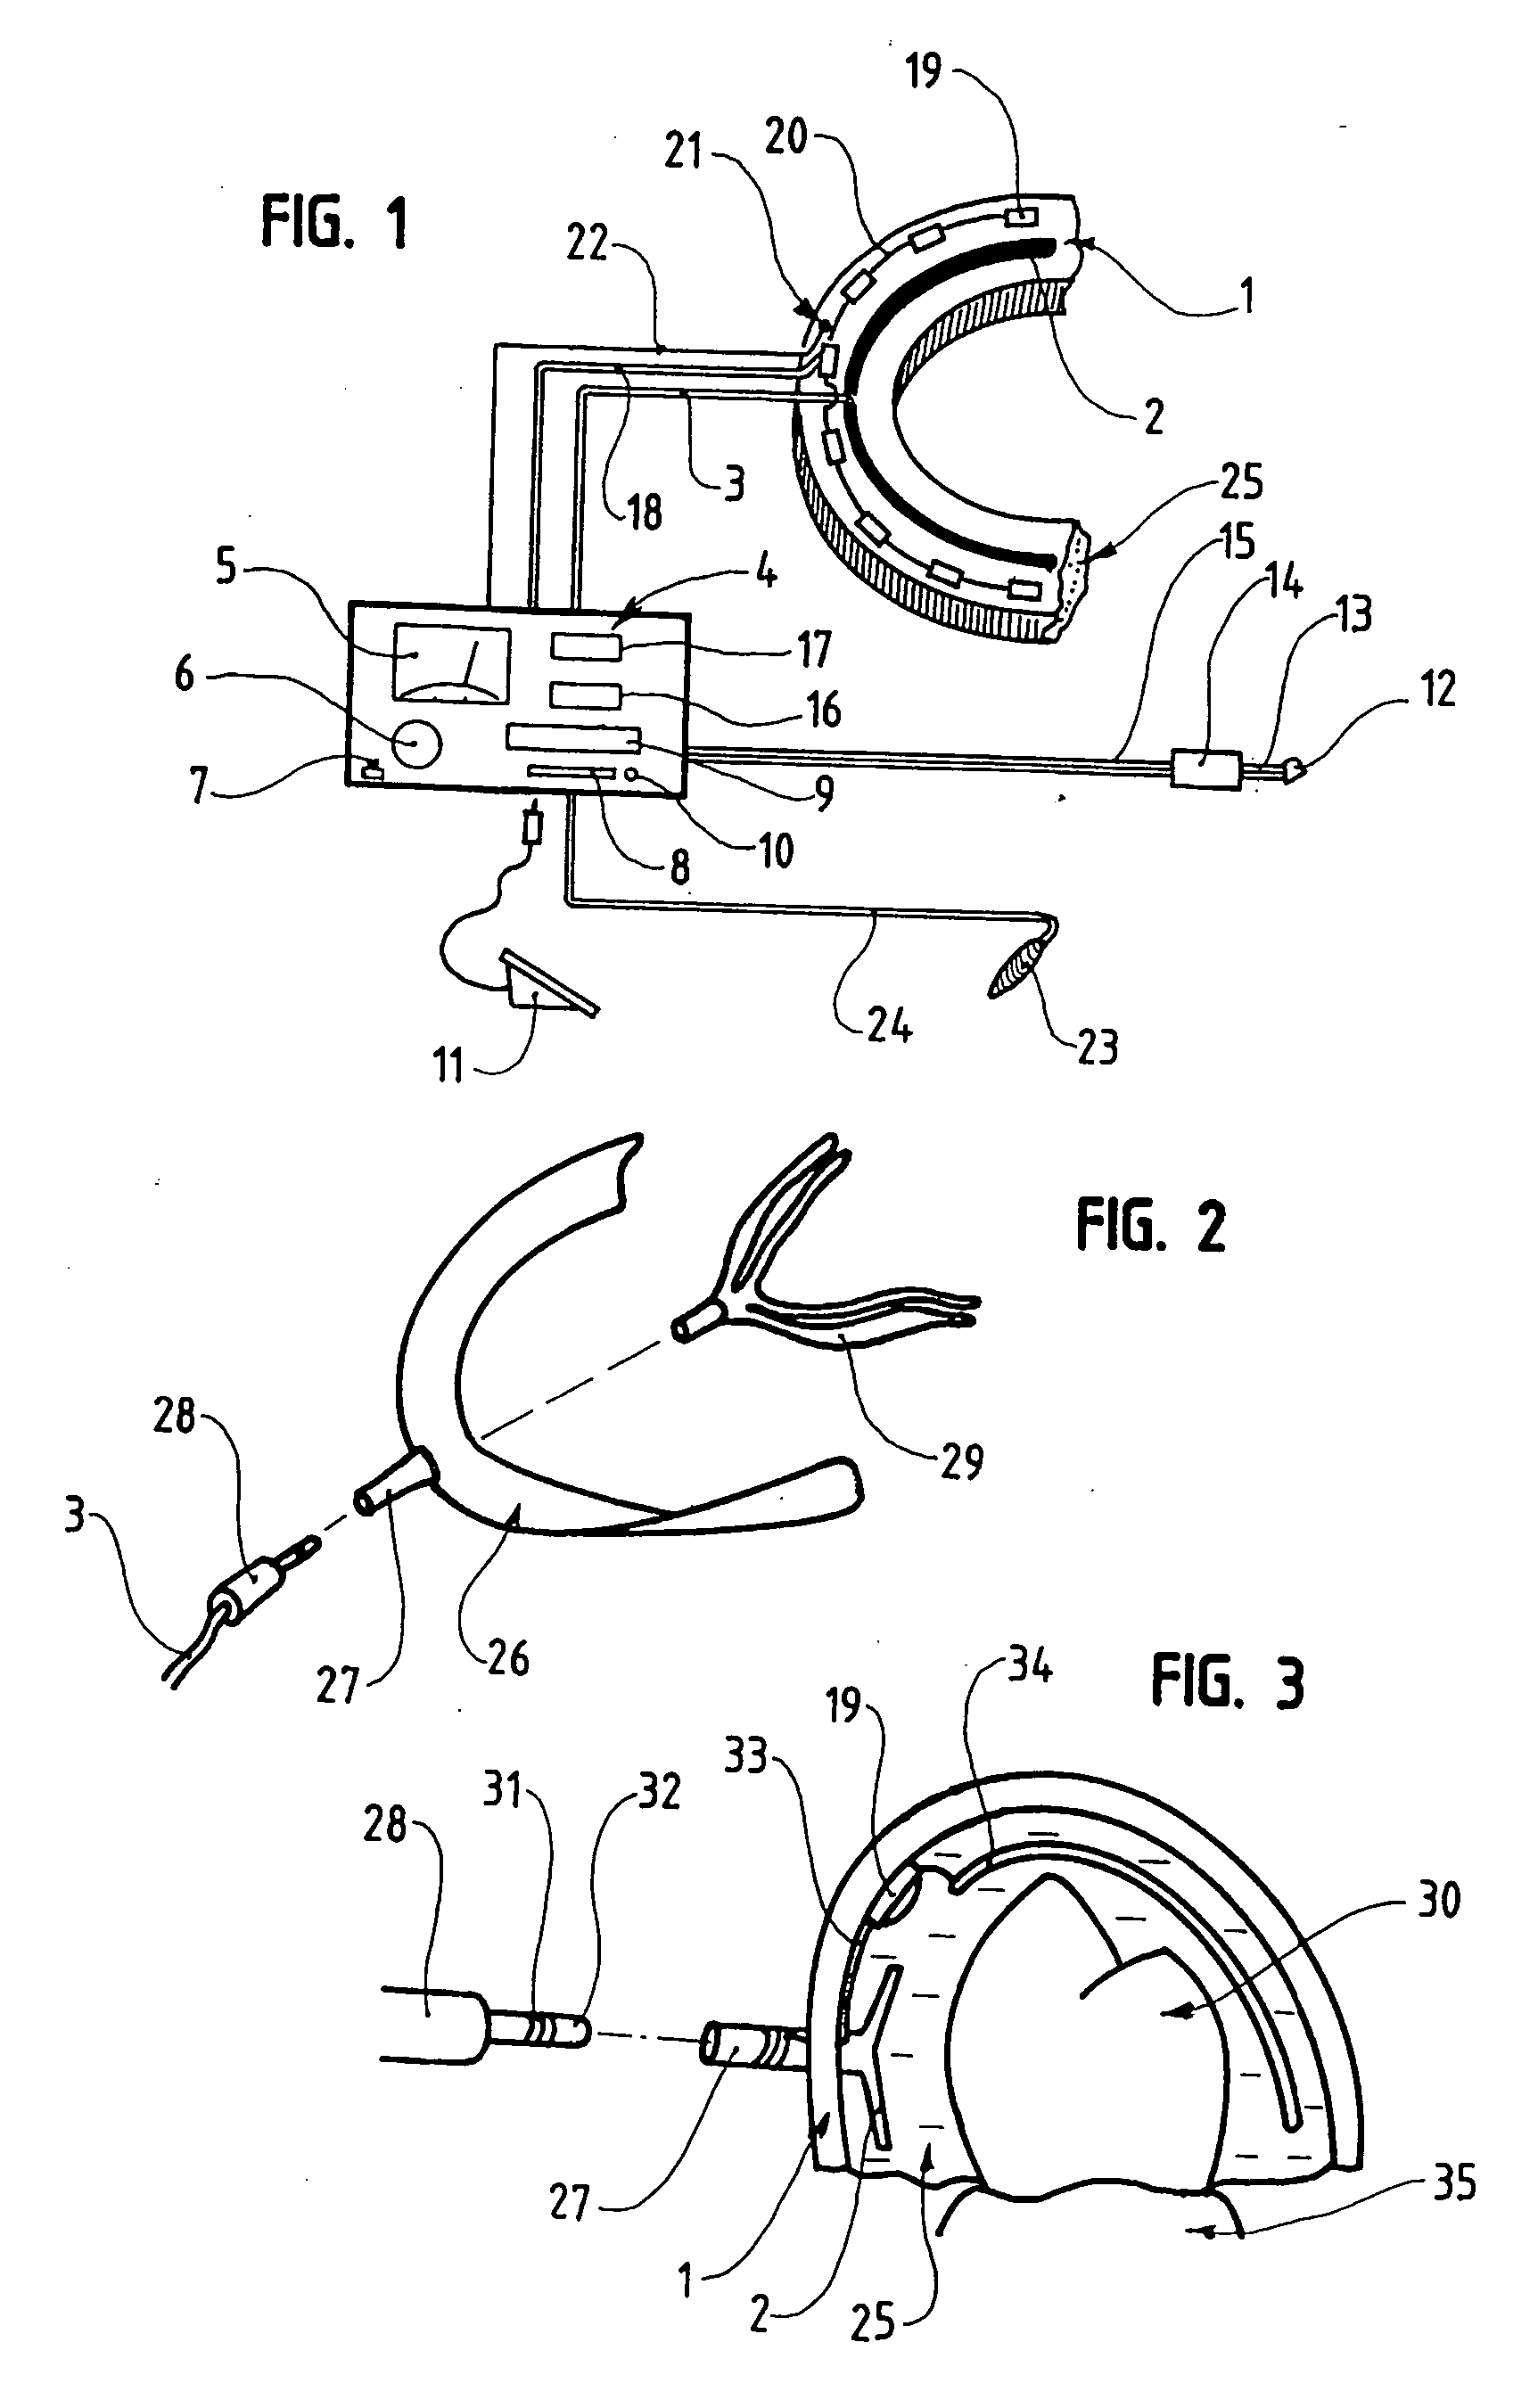 Bleaching device using electro-optical and chemical means, namely in the medical and dental field